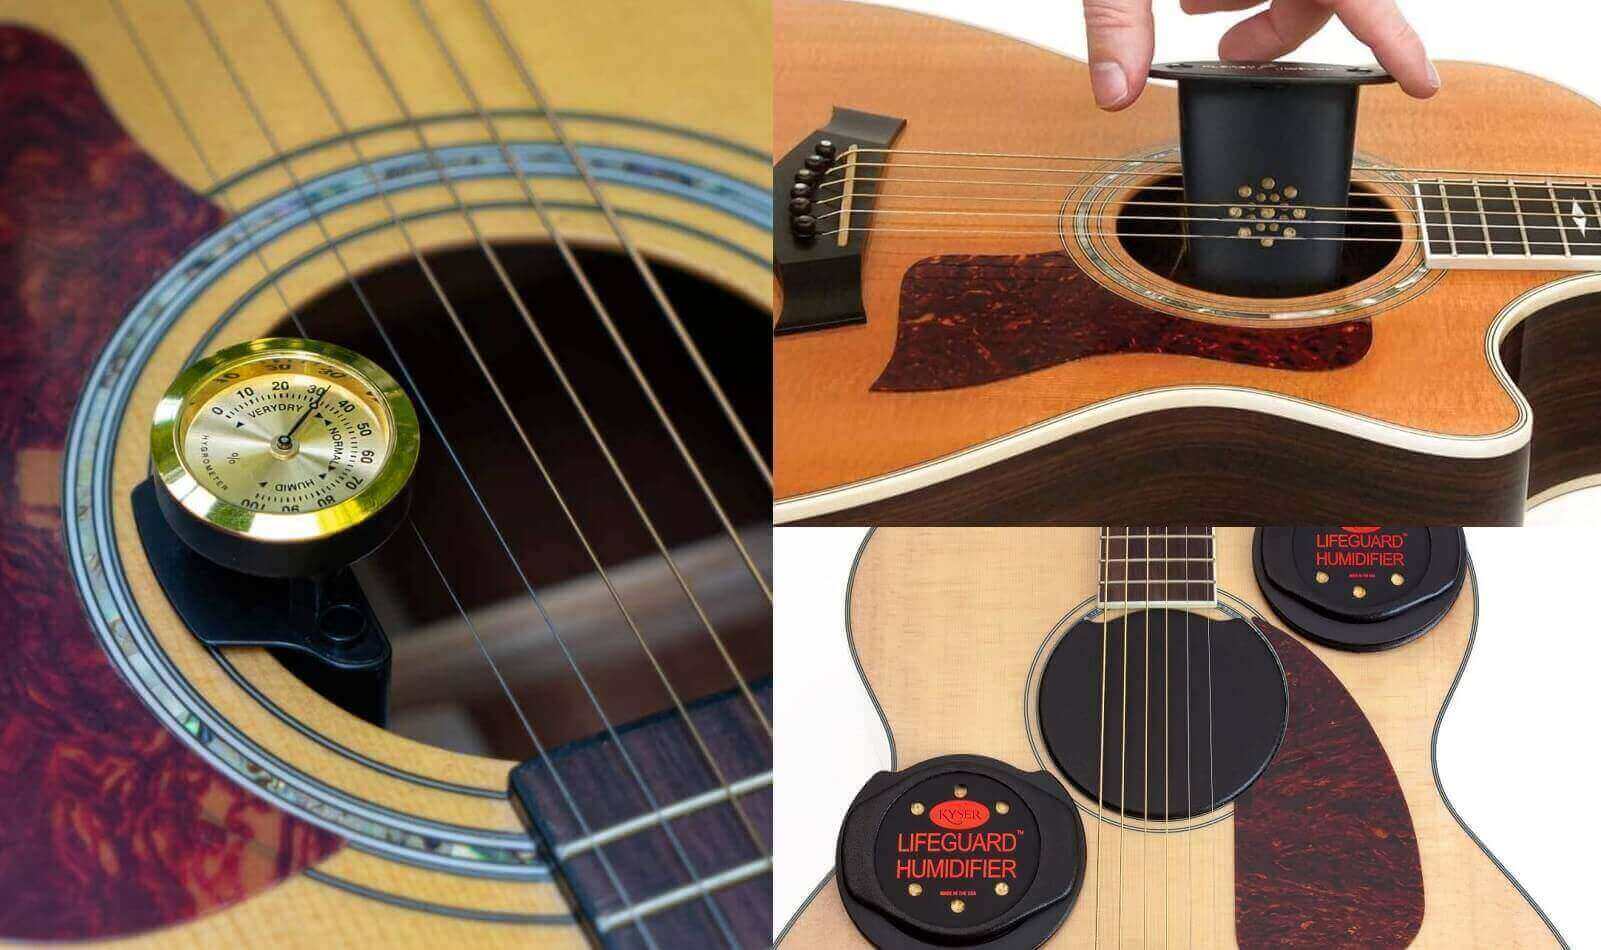 Soundhole humidifiers